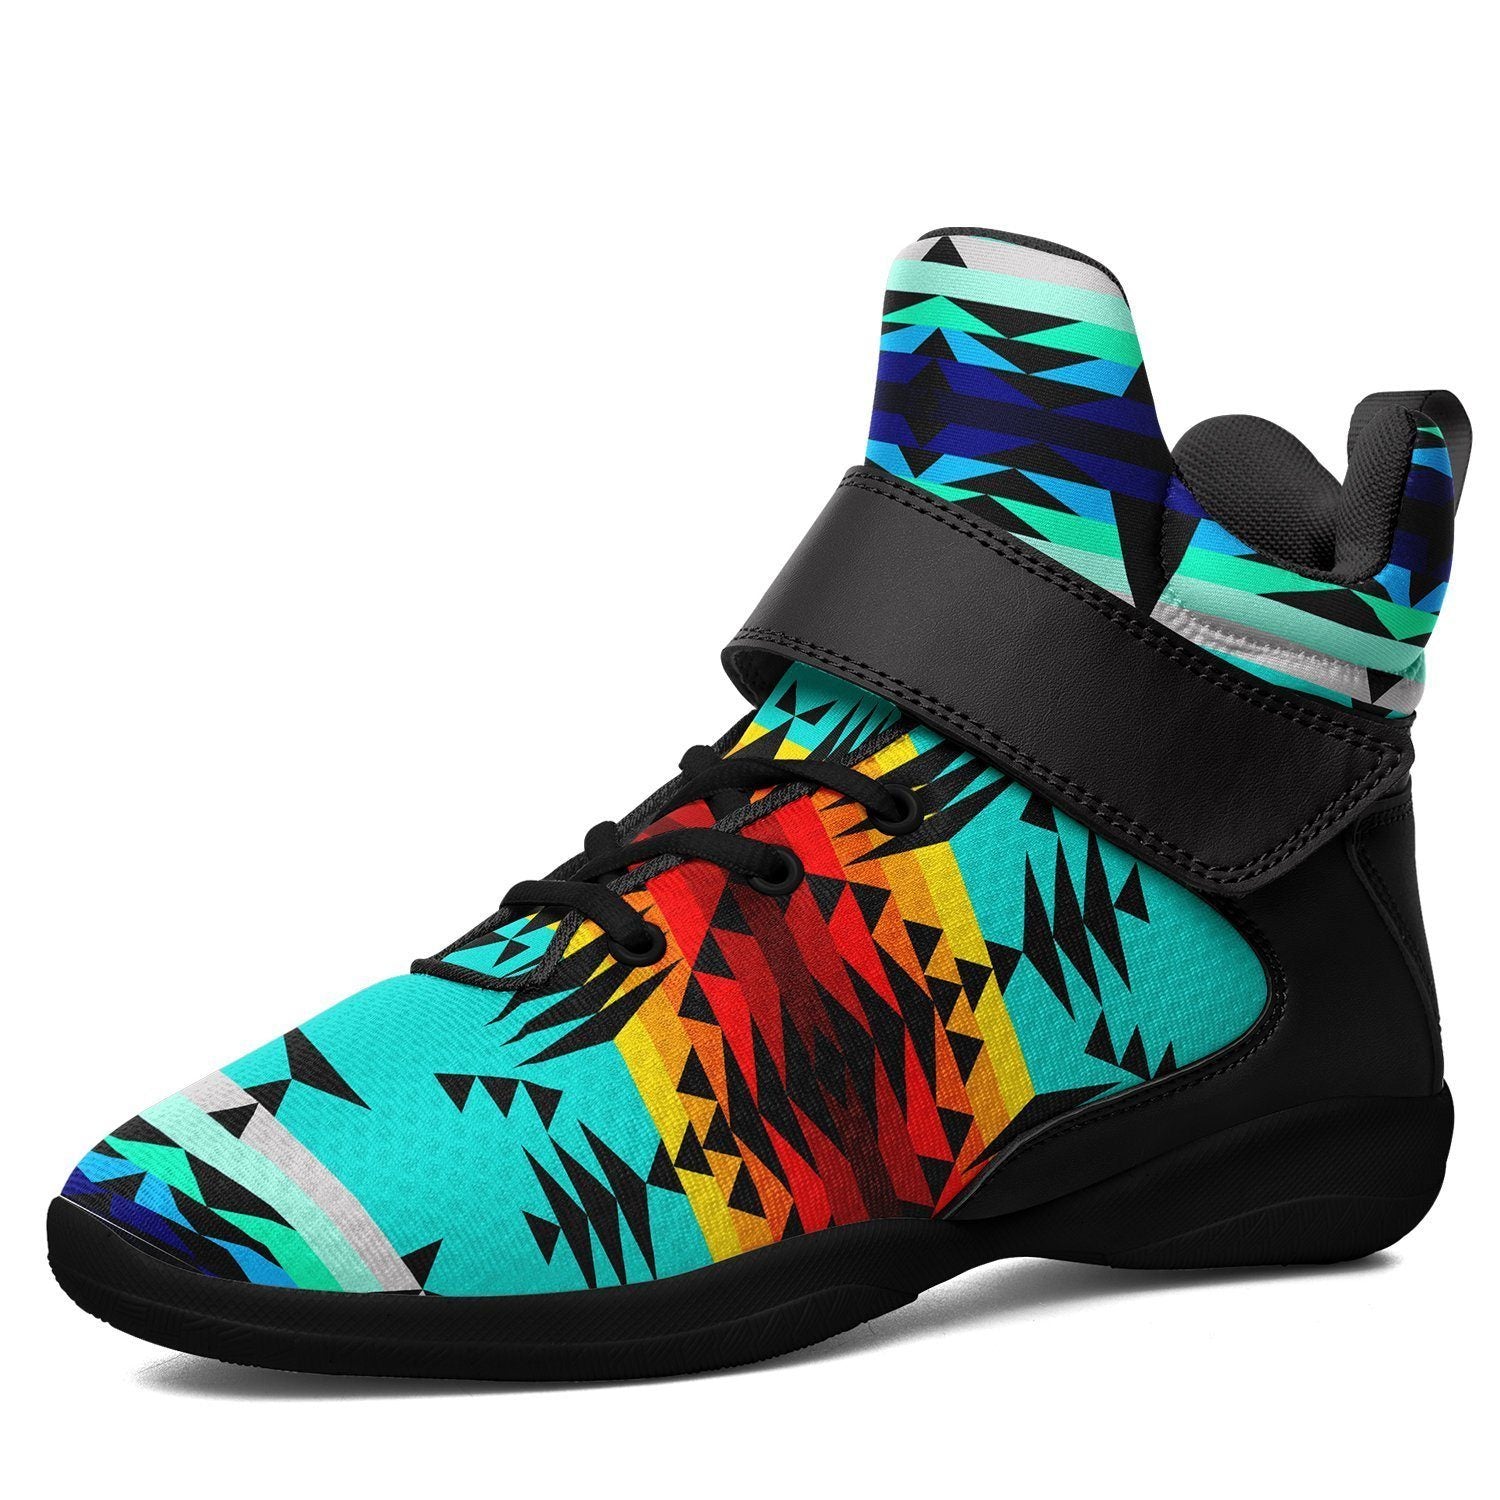 Between the Mountains Ipottaa Basketball / Sport High Top Shoes - Black Sole 49 Dzine 